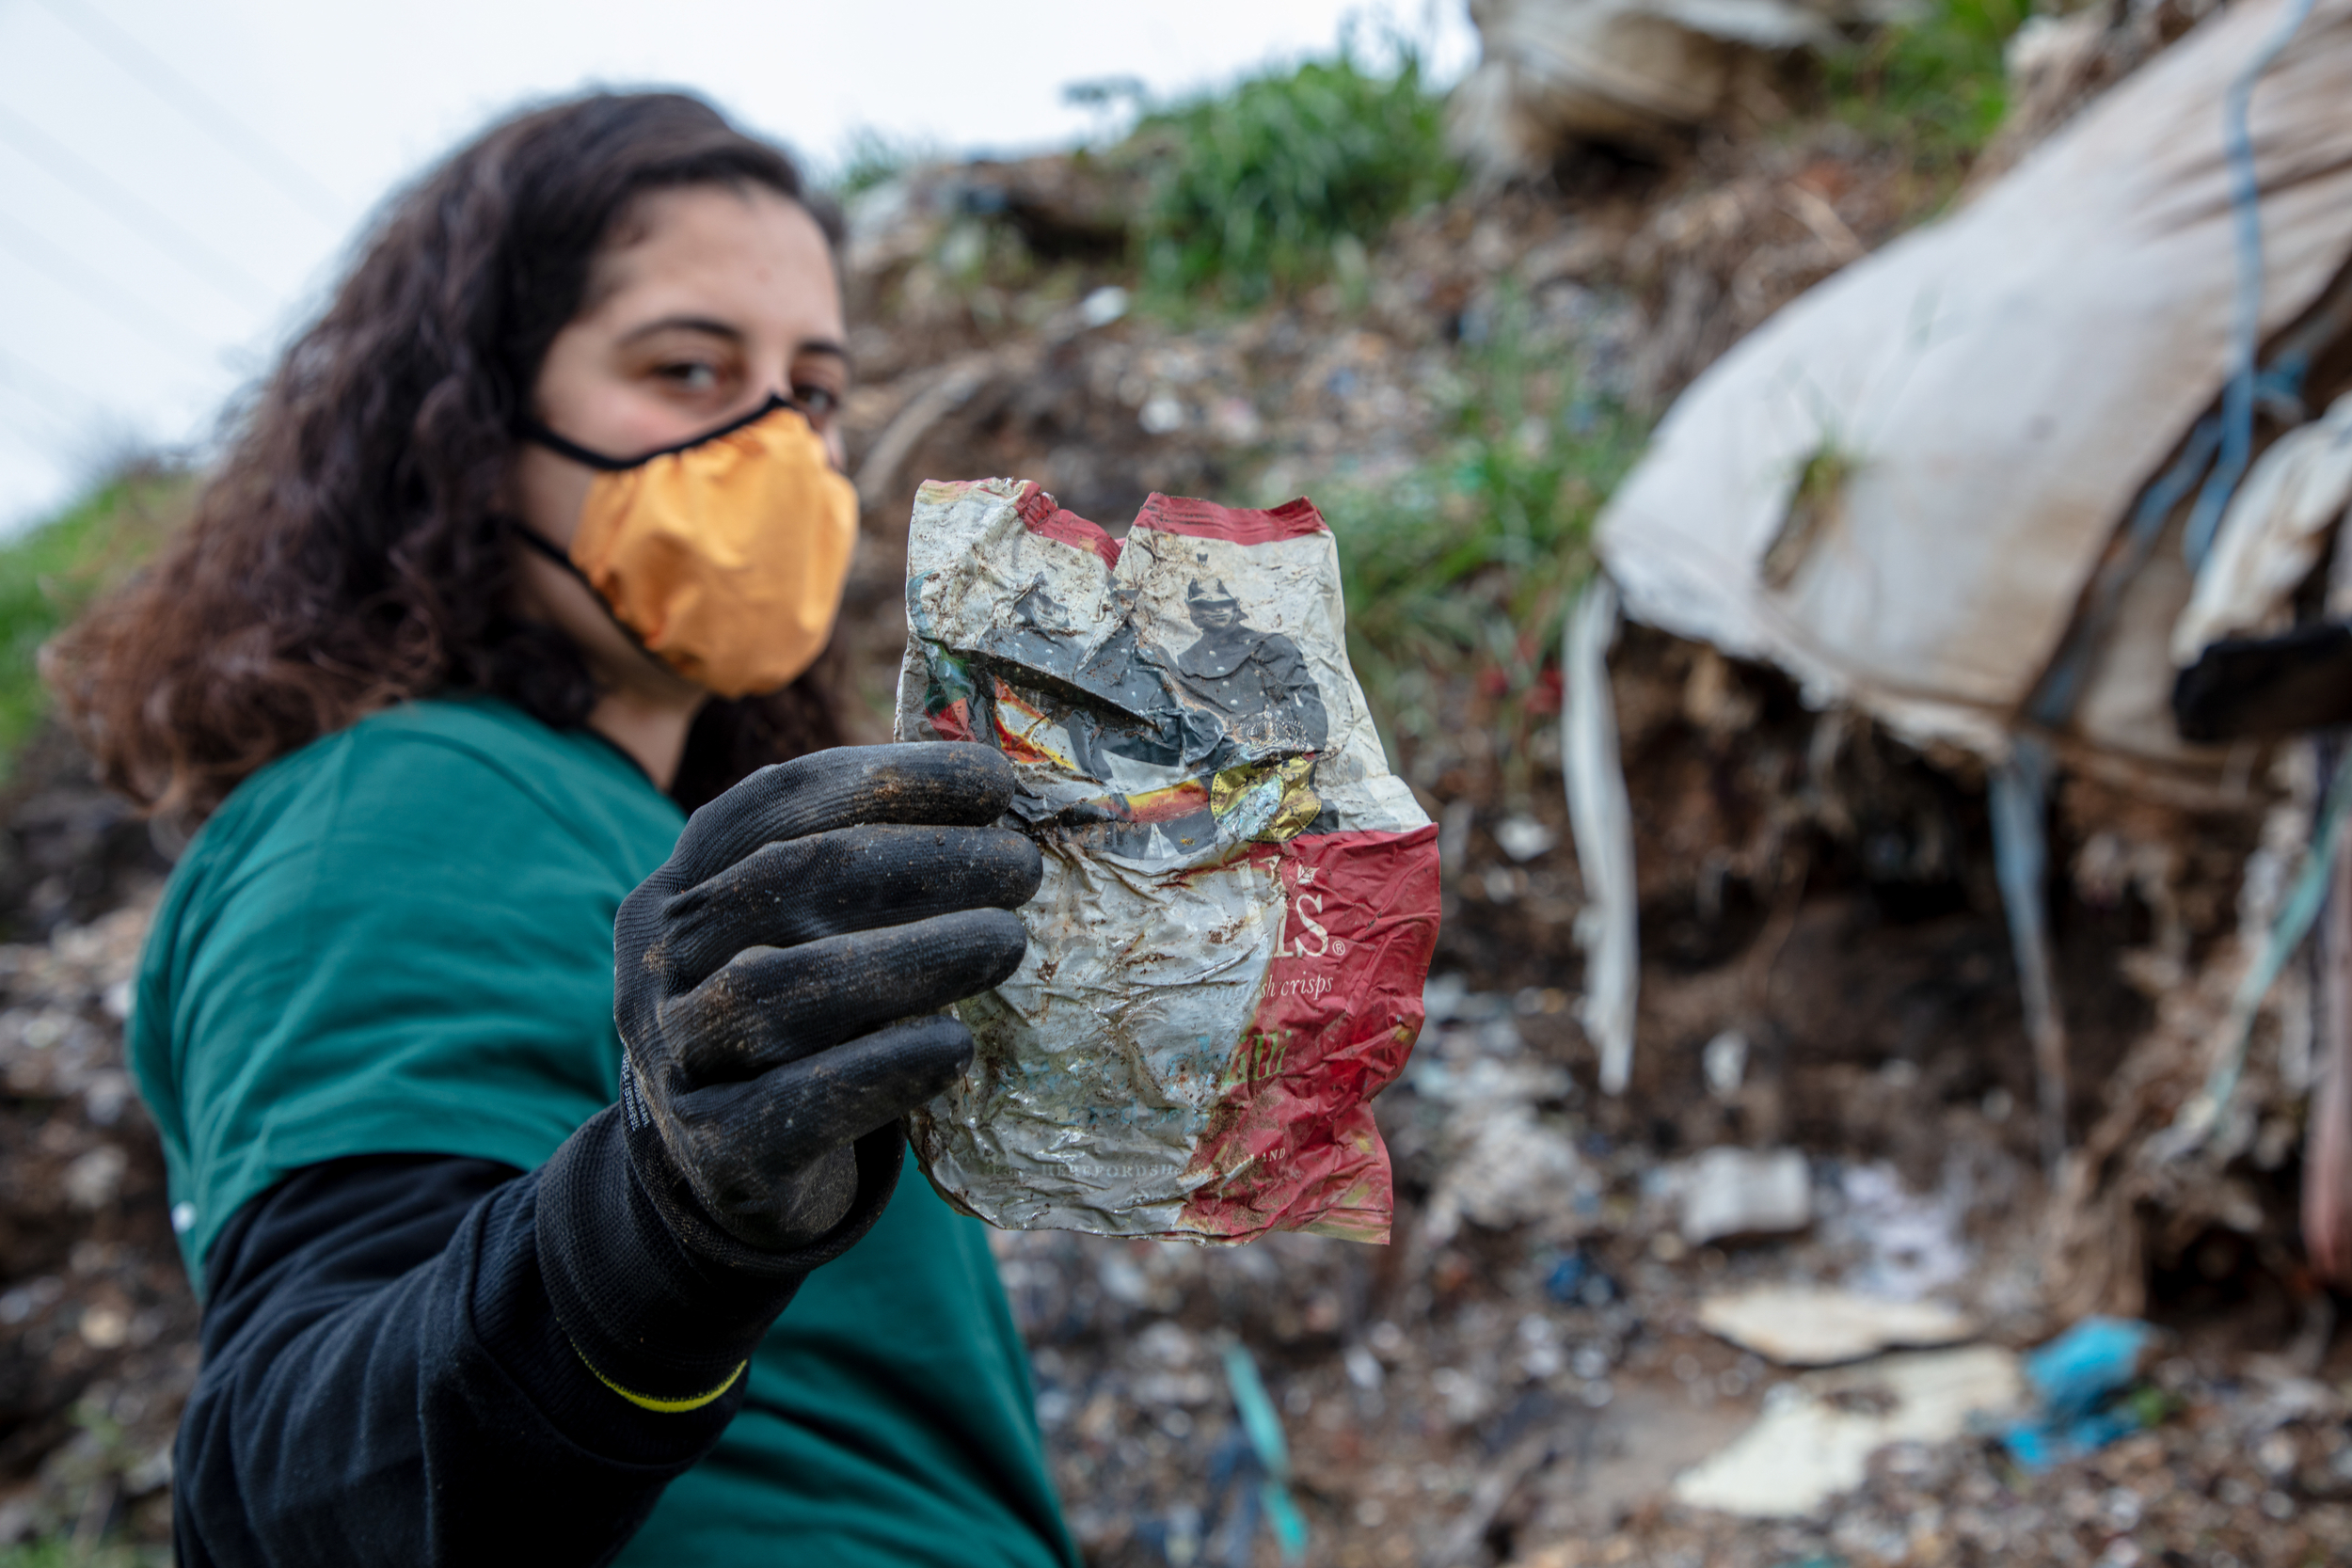 Greenpeace campaigner stands in a waste dump in Turkey, holding up a crisp packet from the UK